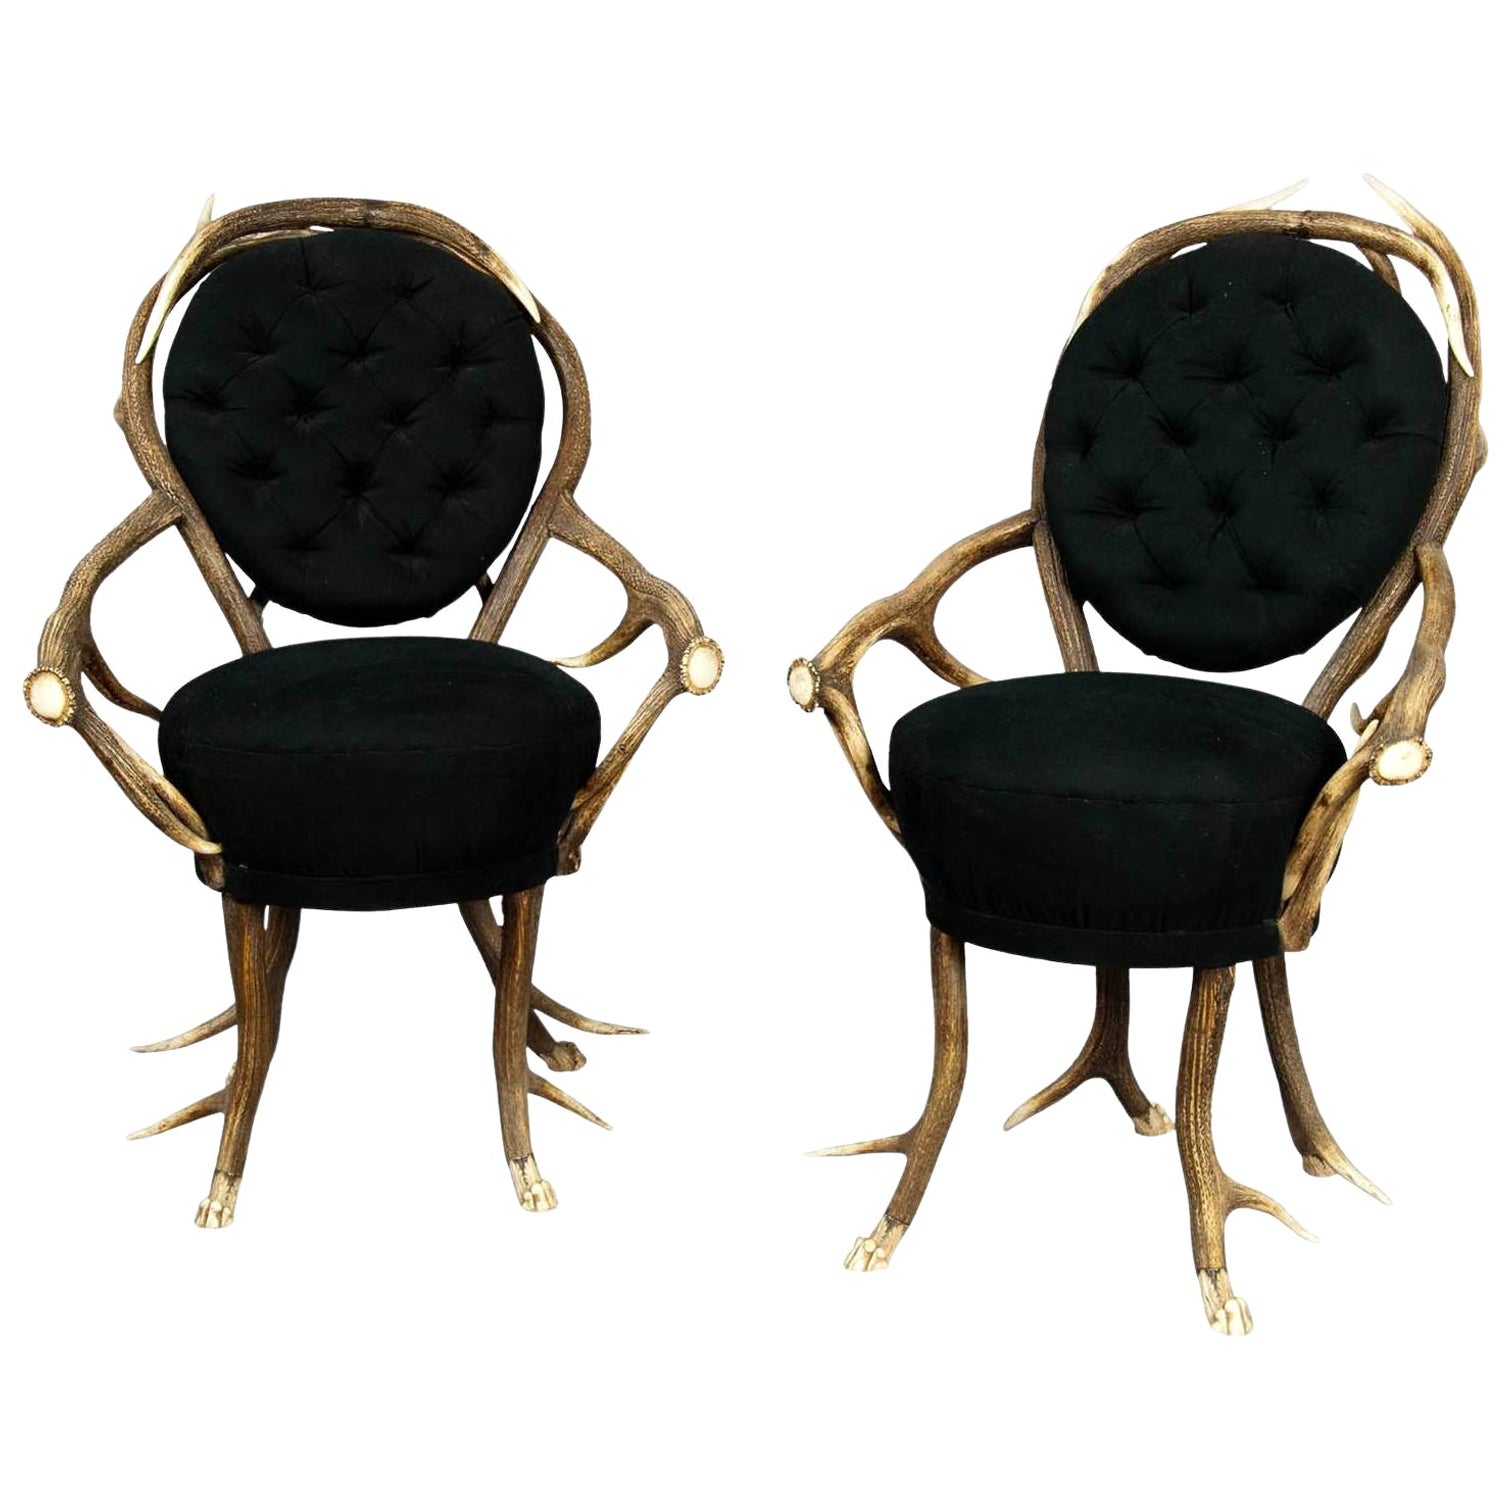 Pair of Rare Antler Parlor Chairs, French, ca. 1860